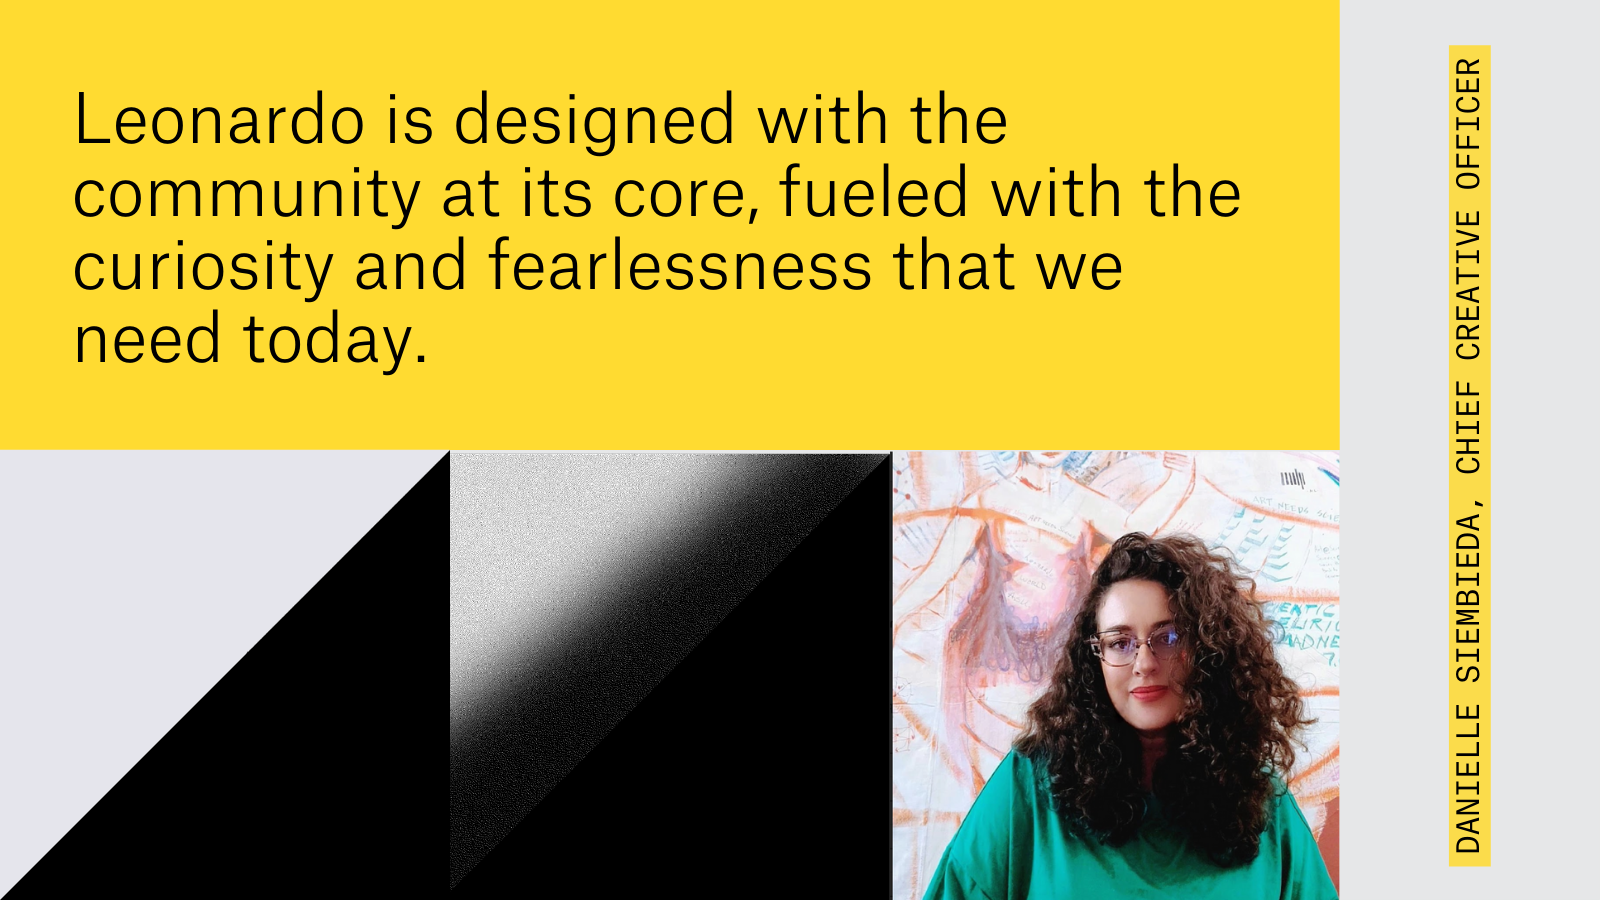 Image reads Leonardo is designed with the community at its core, fueled with the curiosity and fearlessness that we need today. Quote by Danielle Siembieda Chief Creative Officer with headshot of light skin woman with brown curly hair and red lips